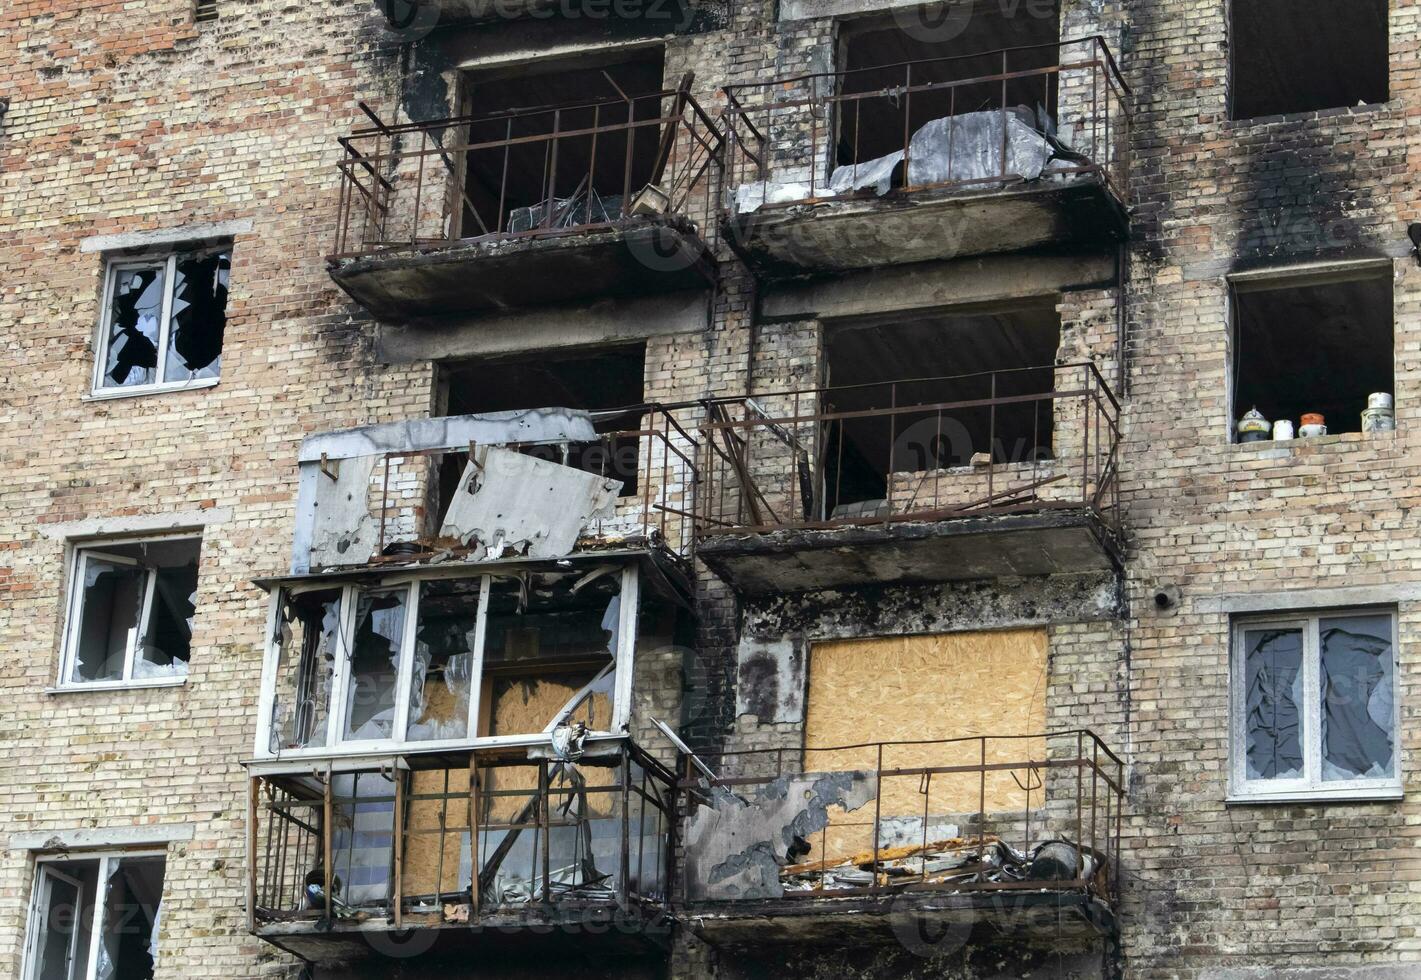 Consequences of the war in the capital of Ukraine. A bombed-out building damaged by shells after an airstrike. The rocket blew up the house. Holes in the walls from shells. photo